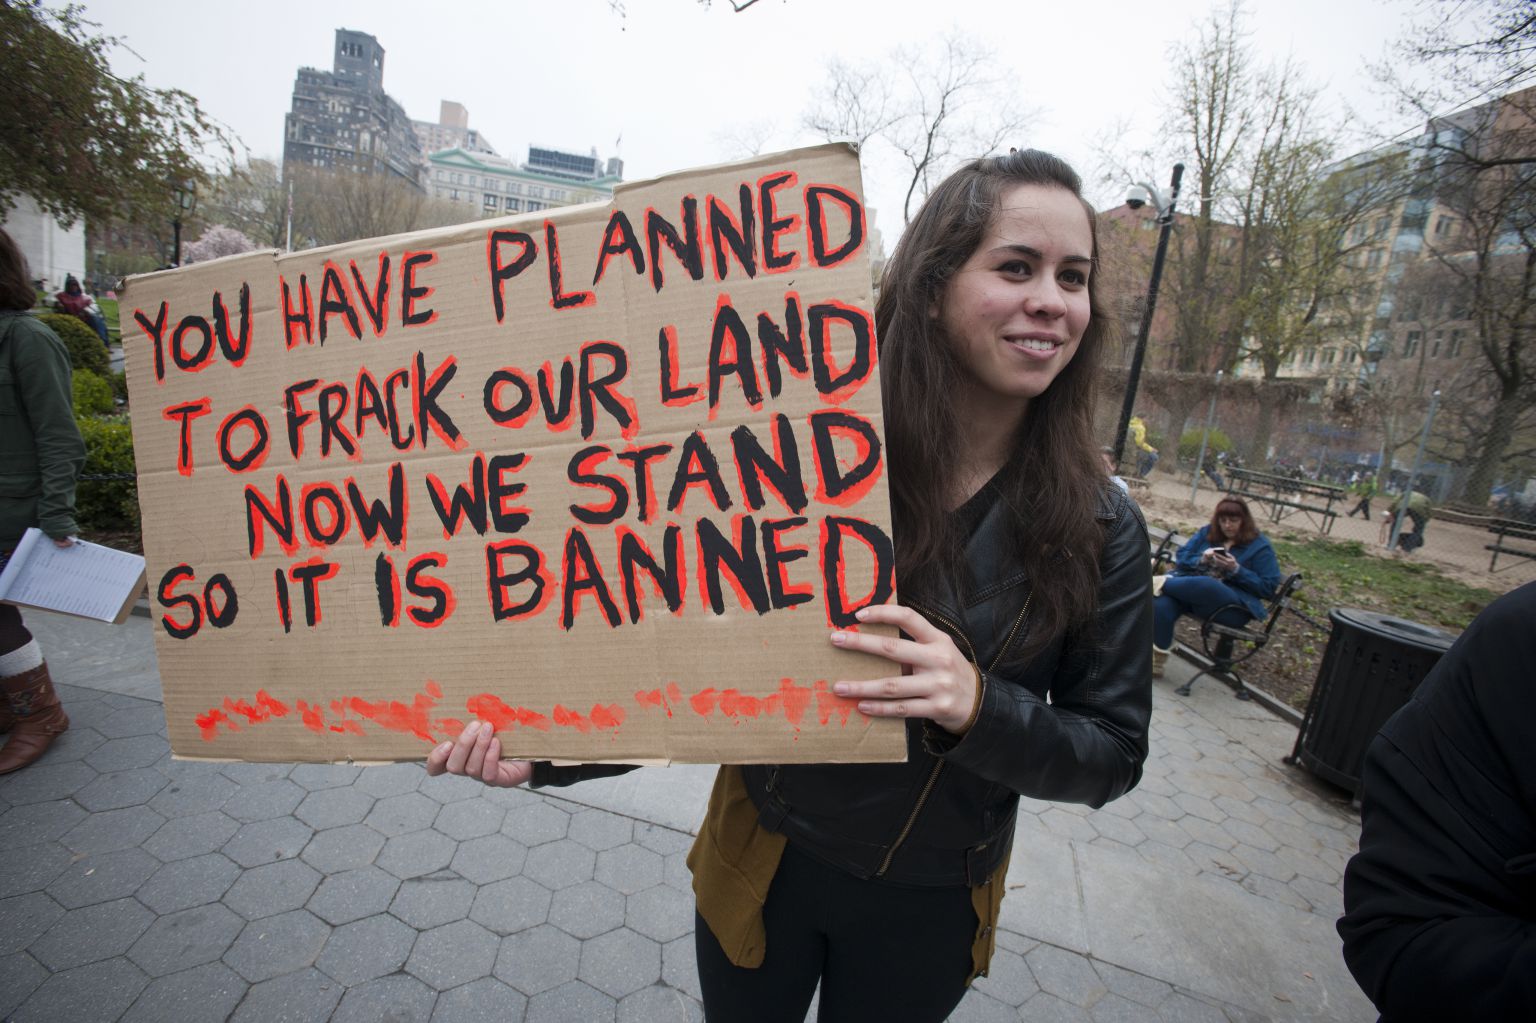 A teenage girl at a protest holds a sign reading "You have planned to frack our land, now we stand so it is banned."